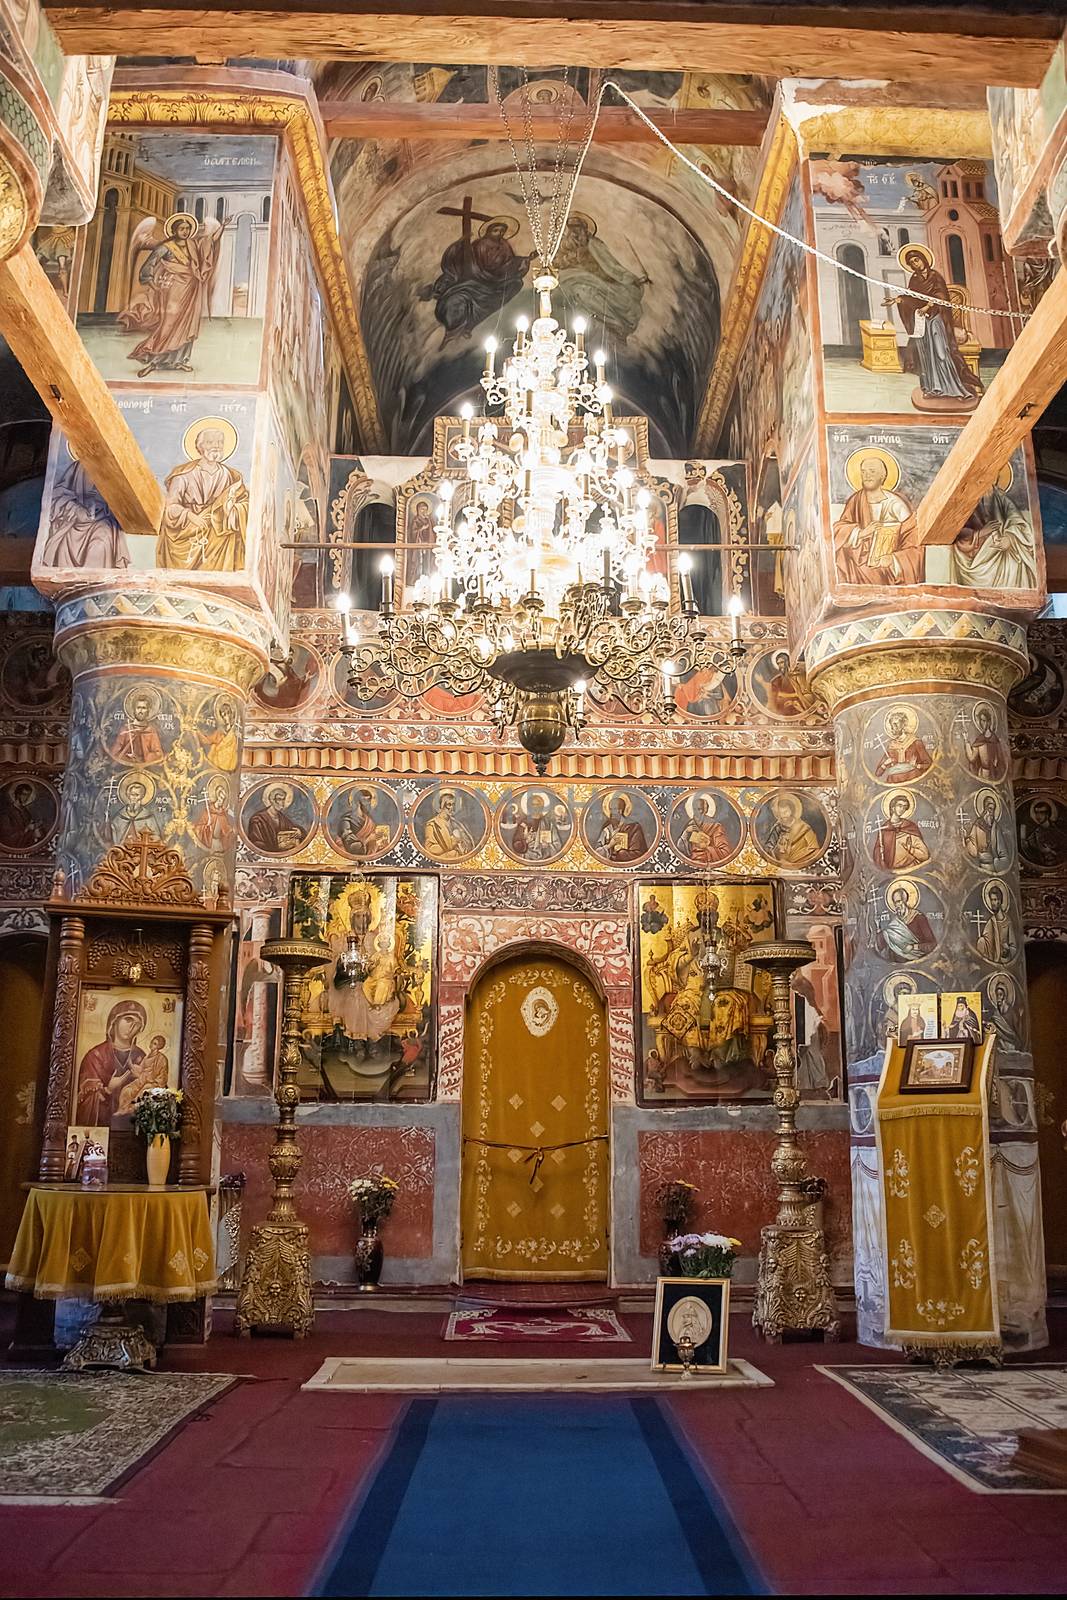 Snagov, Romania - Aug 2019: Interior of Snagov Monastary, the supposed resting place of Vlad the Impaler